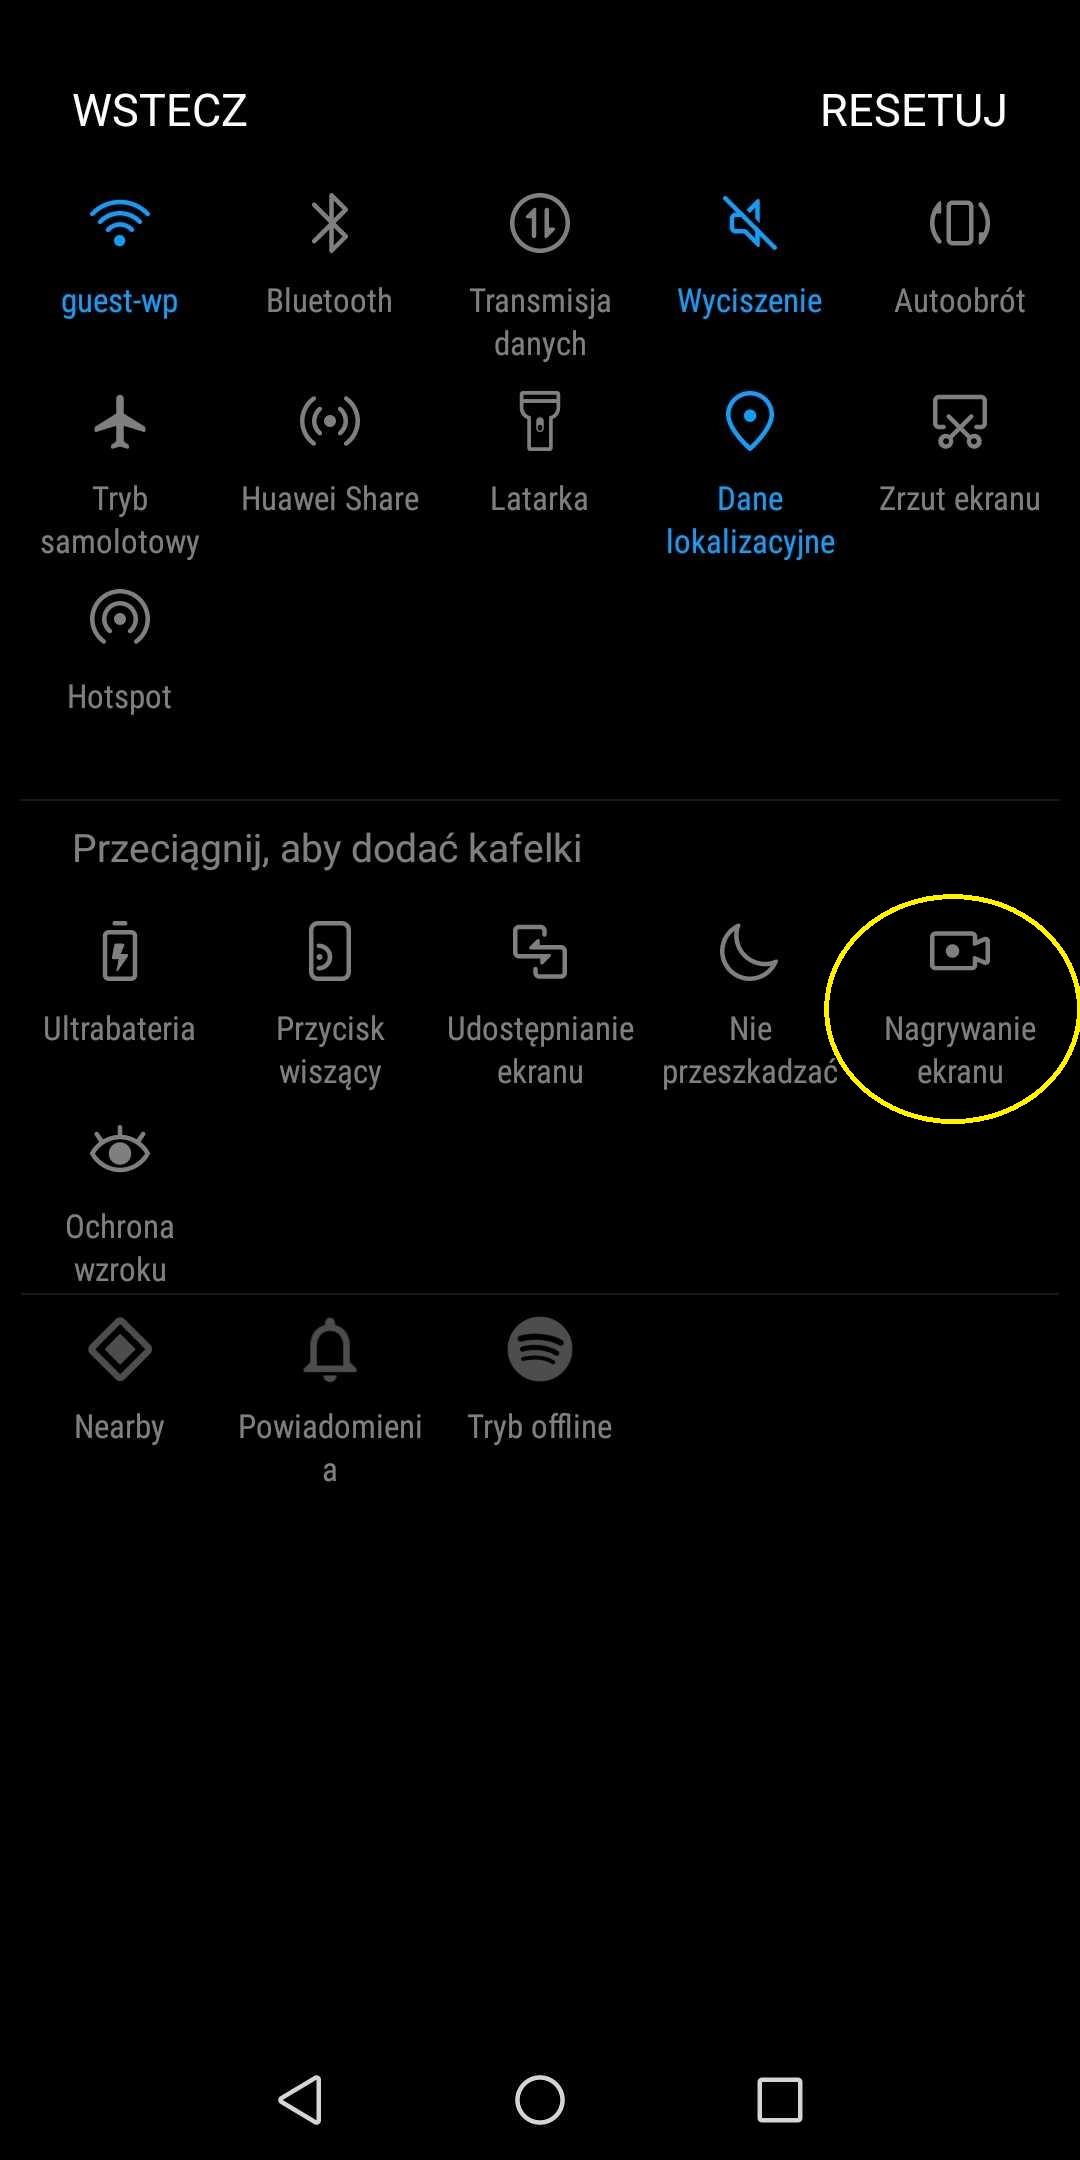 How to record the screen on Android and iOS smartphones?